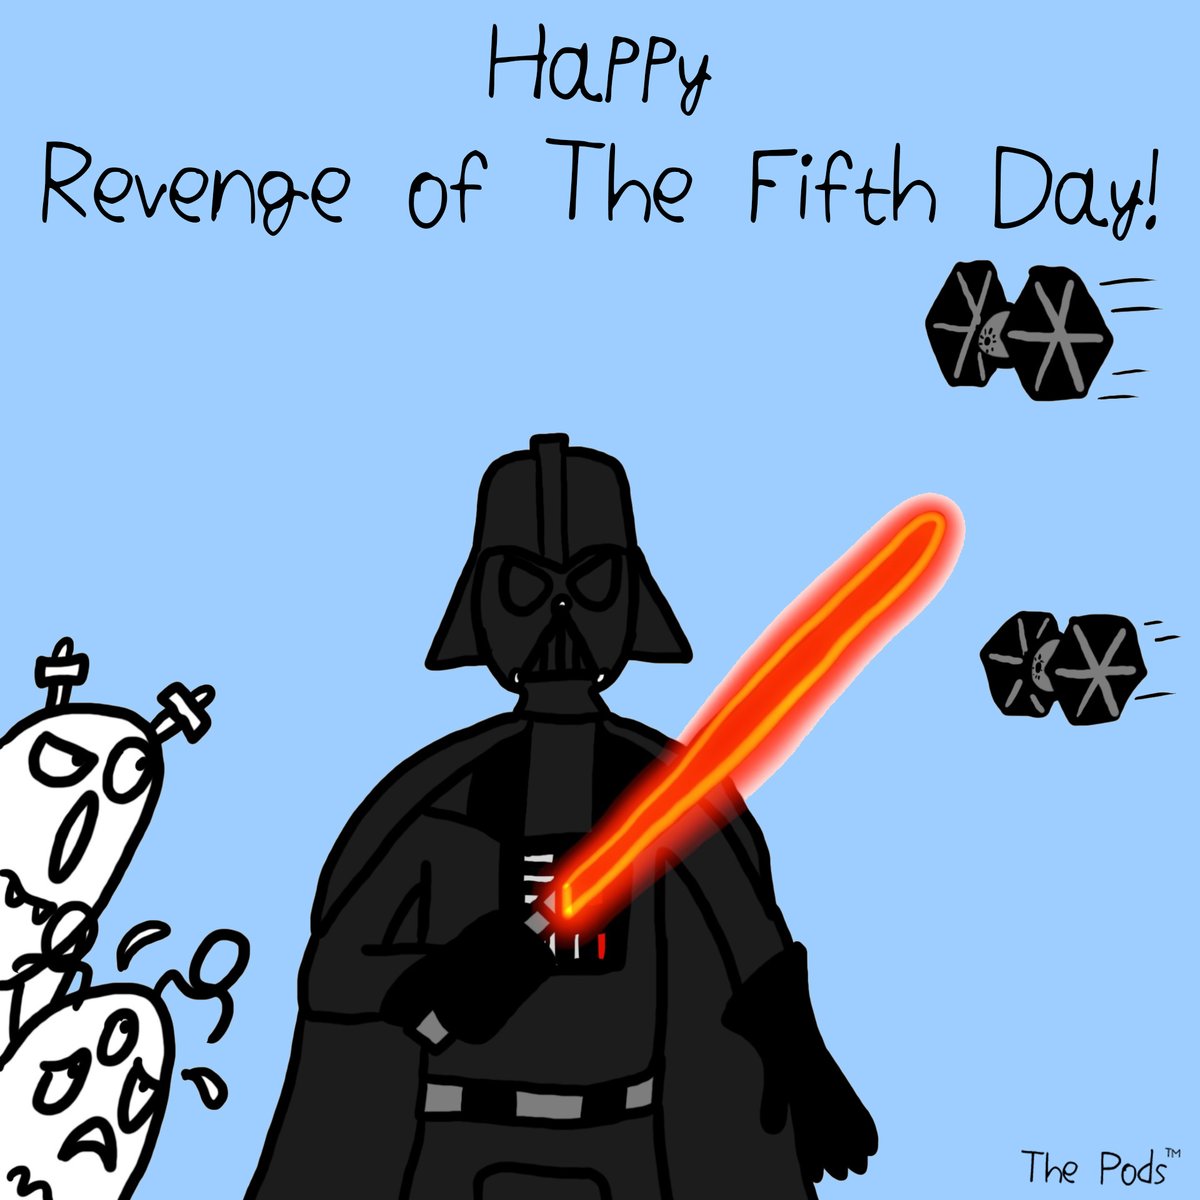 Beware the Dark Side of the Force, as it’s #Revengeofthe5th today!
#StarWarsday #starwars #darthvader #maythefprcebewithyou #sith #stormtrooper #stormtroopers #meetthepods #thepods #musclepod #bunnypod #revengeofthefifthday